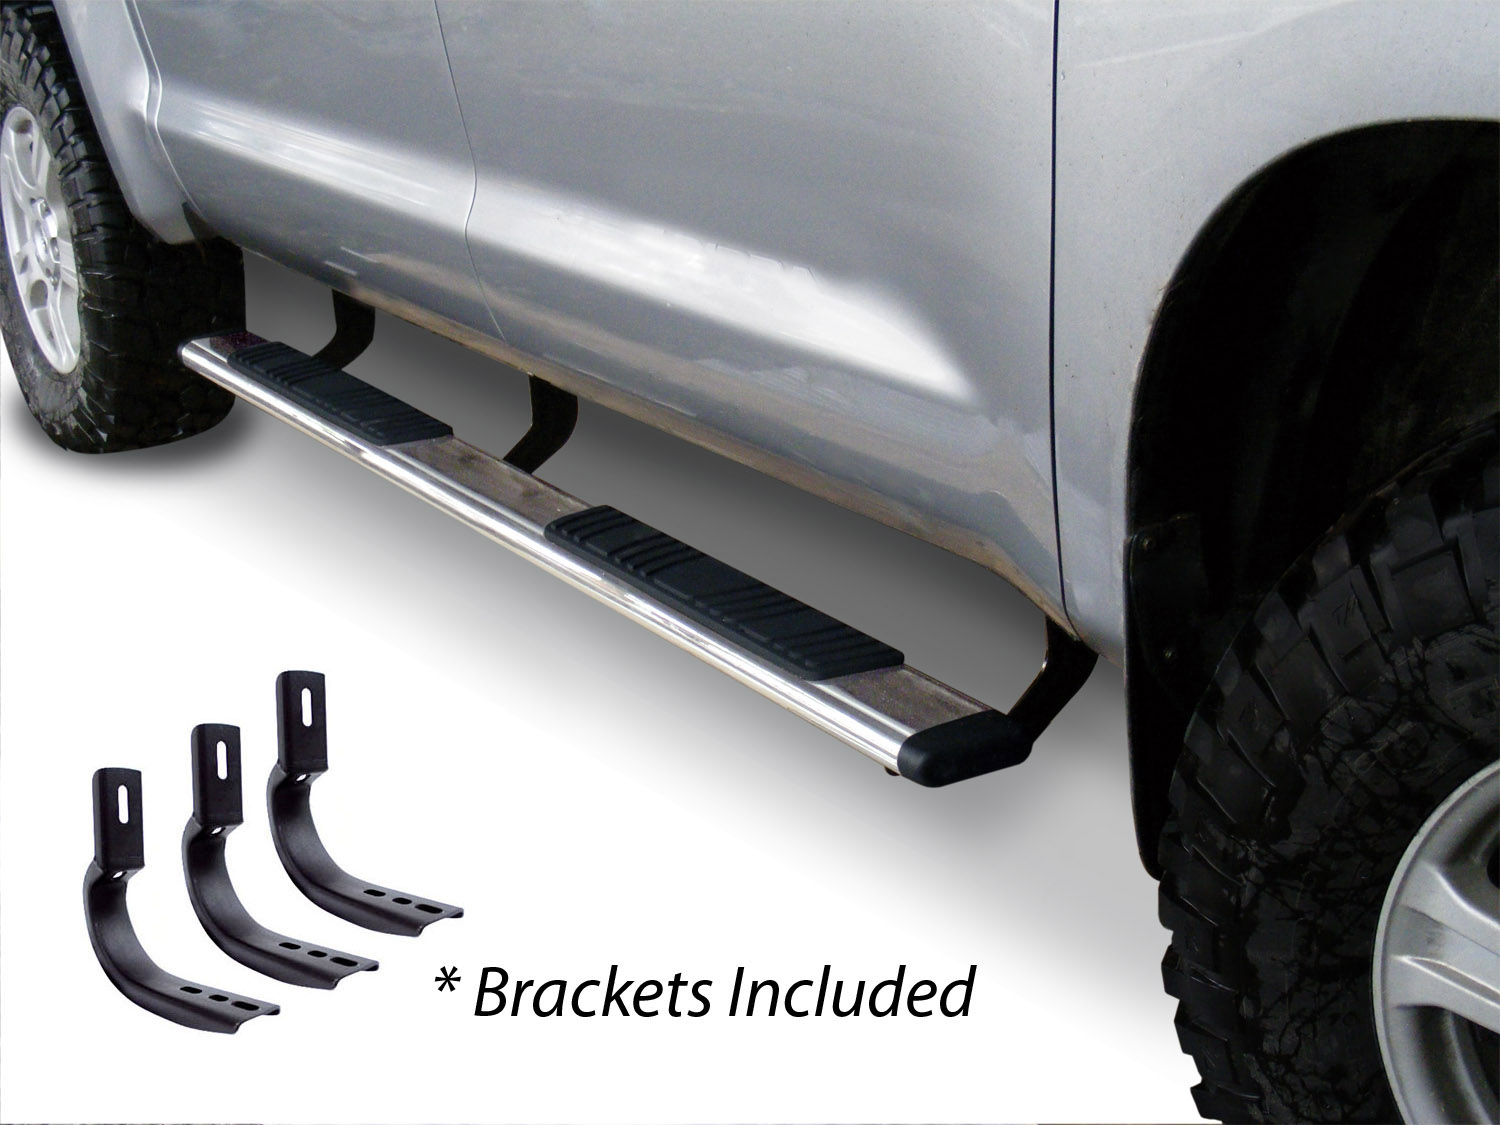 5" OE Xtreme Low Profile SideSteps Kit - 87" Long Stainless Steel + Brackets